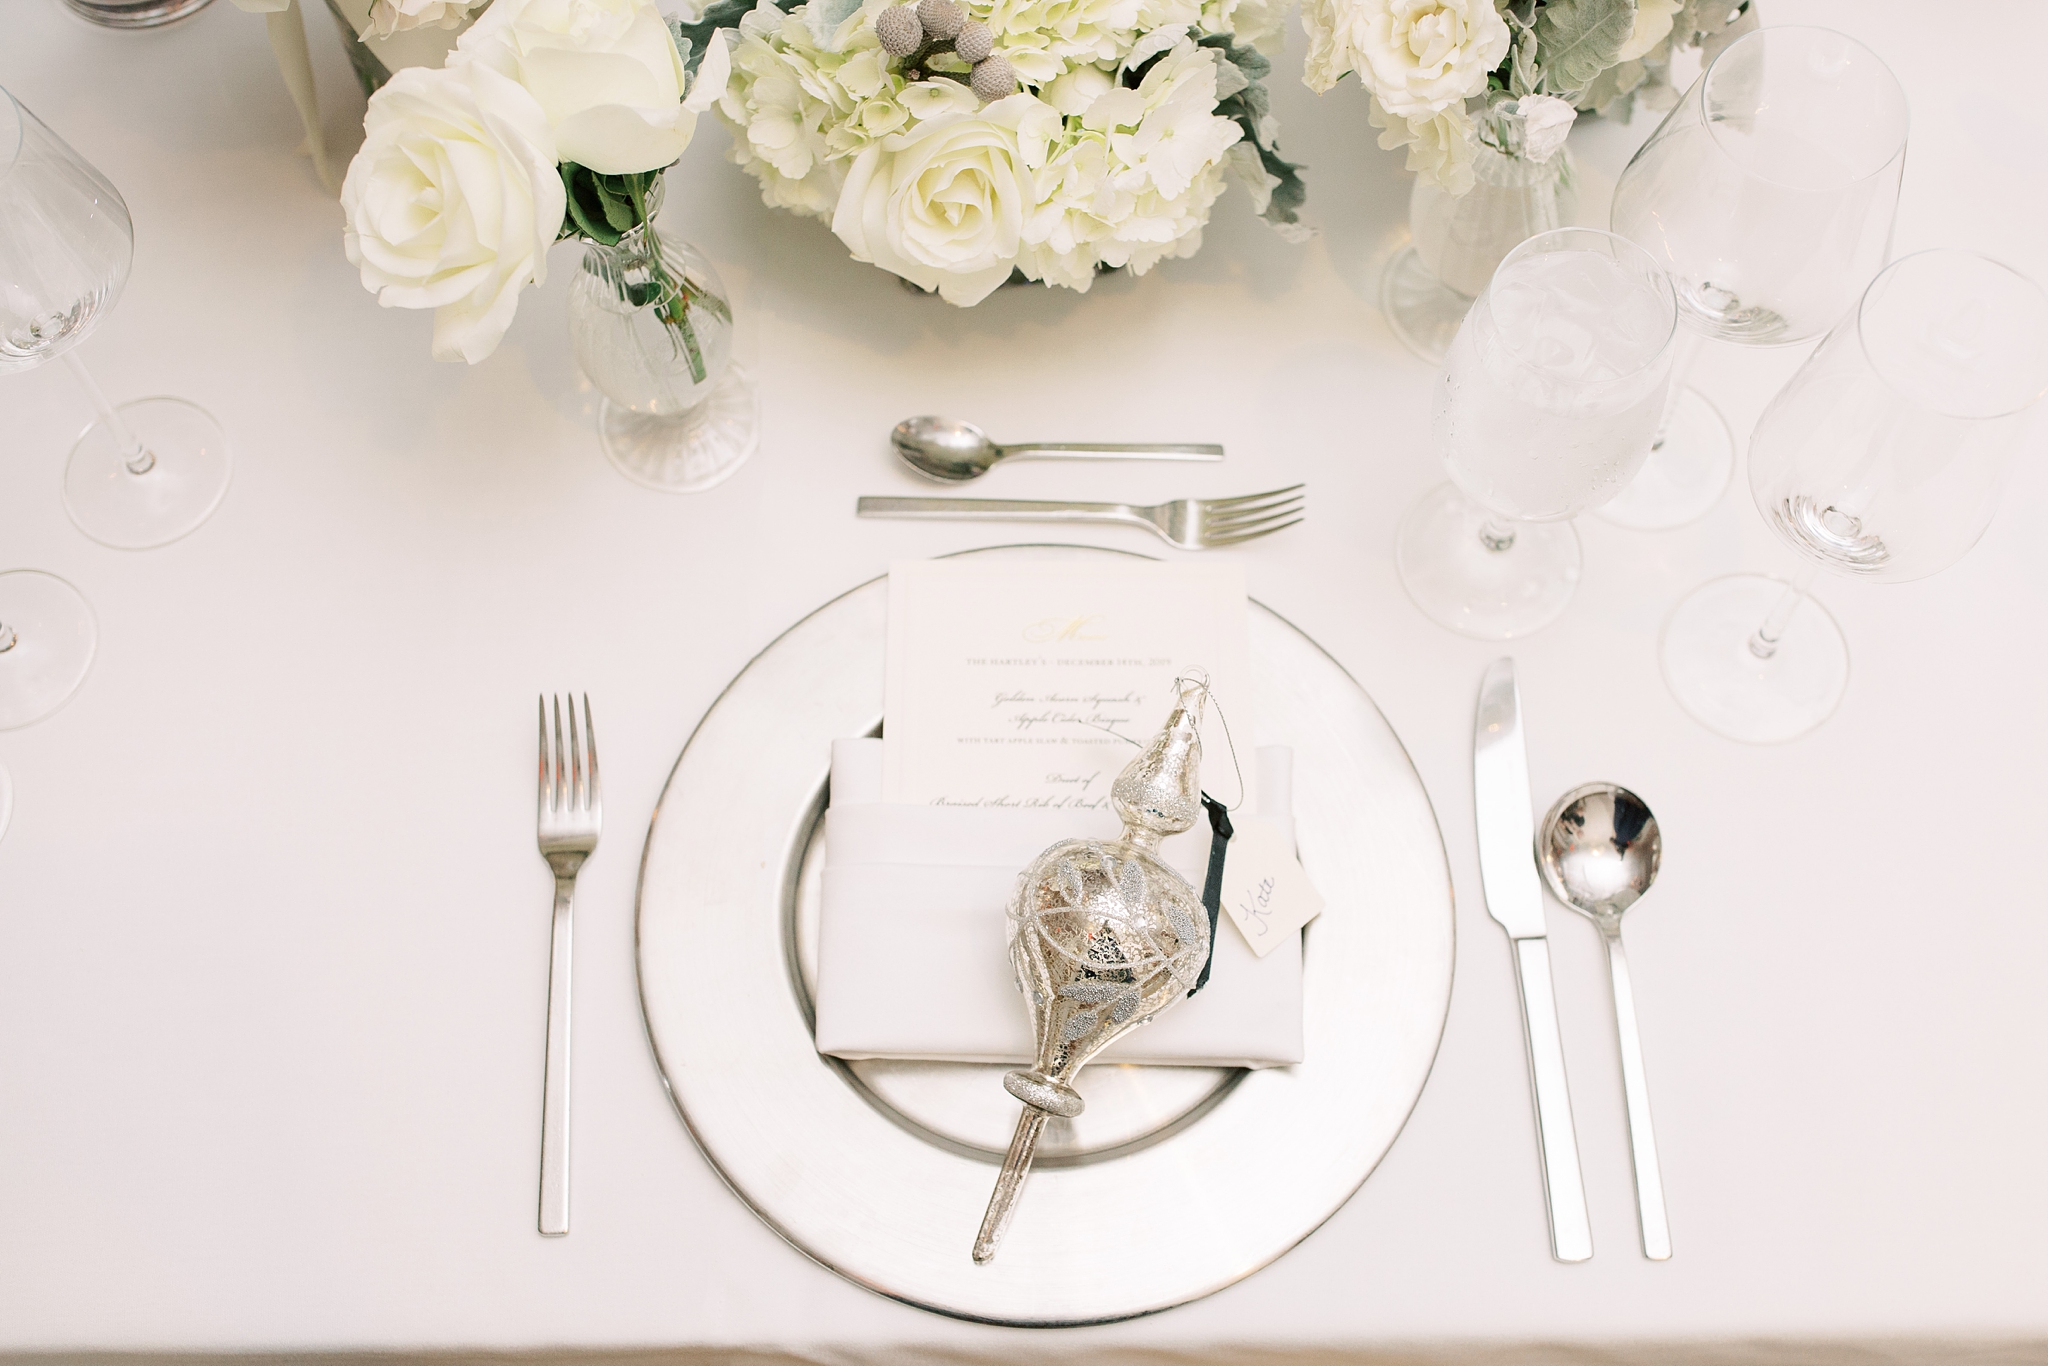 An elegant December wedding at the Fairmont Hotel in Washington, DC designed by EVOKE with florals by Amaryllis. 